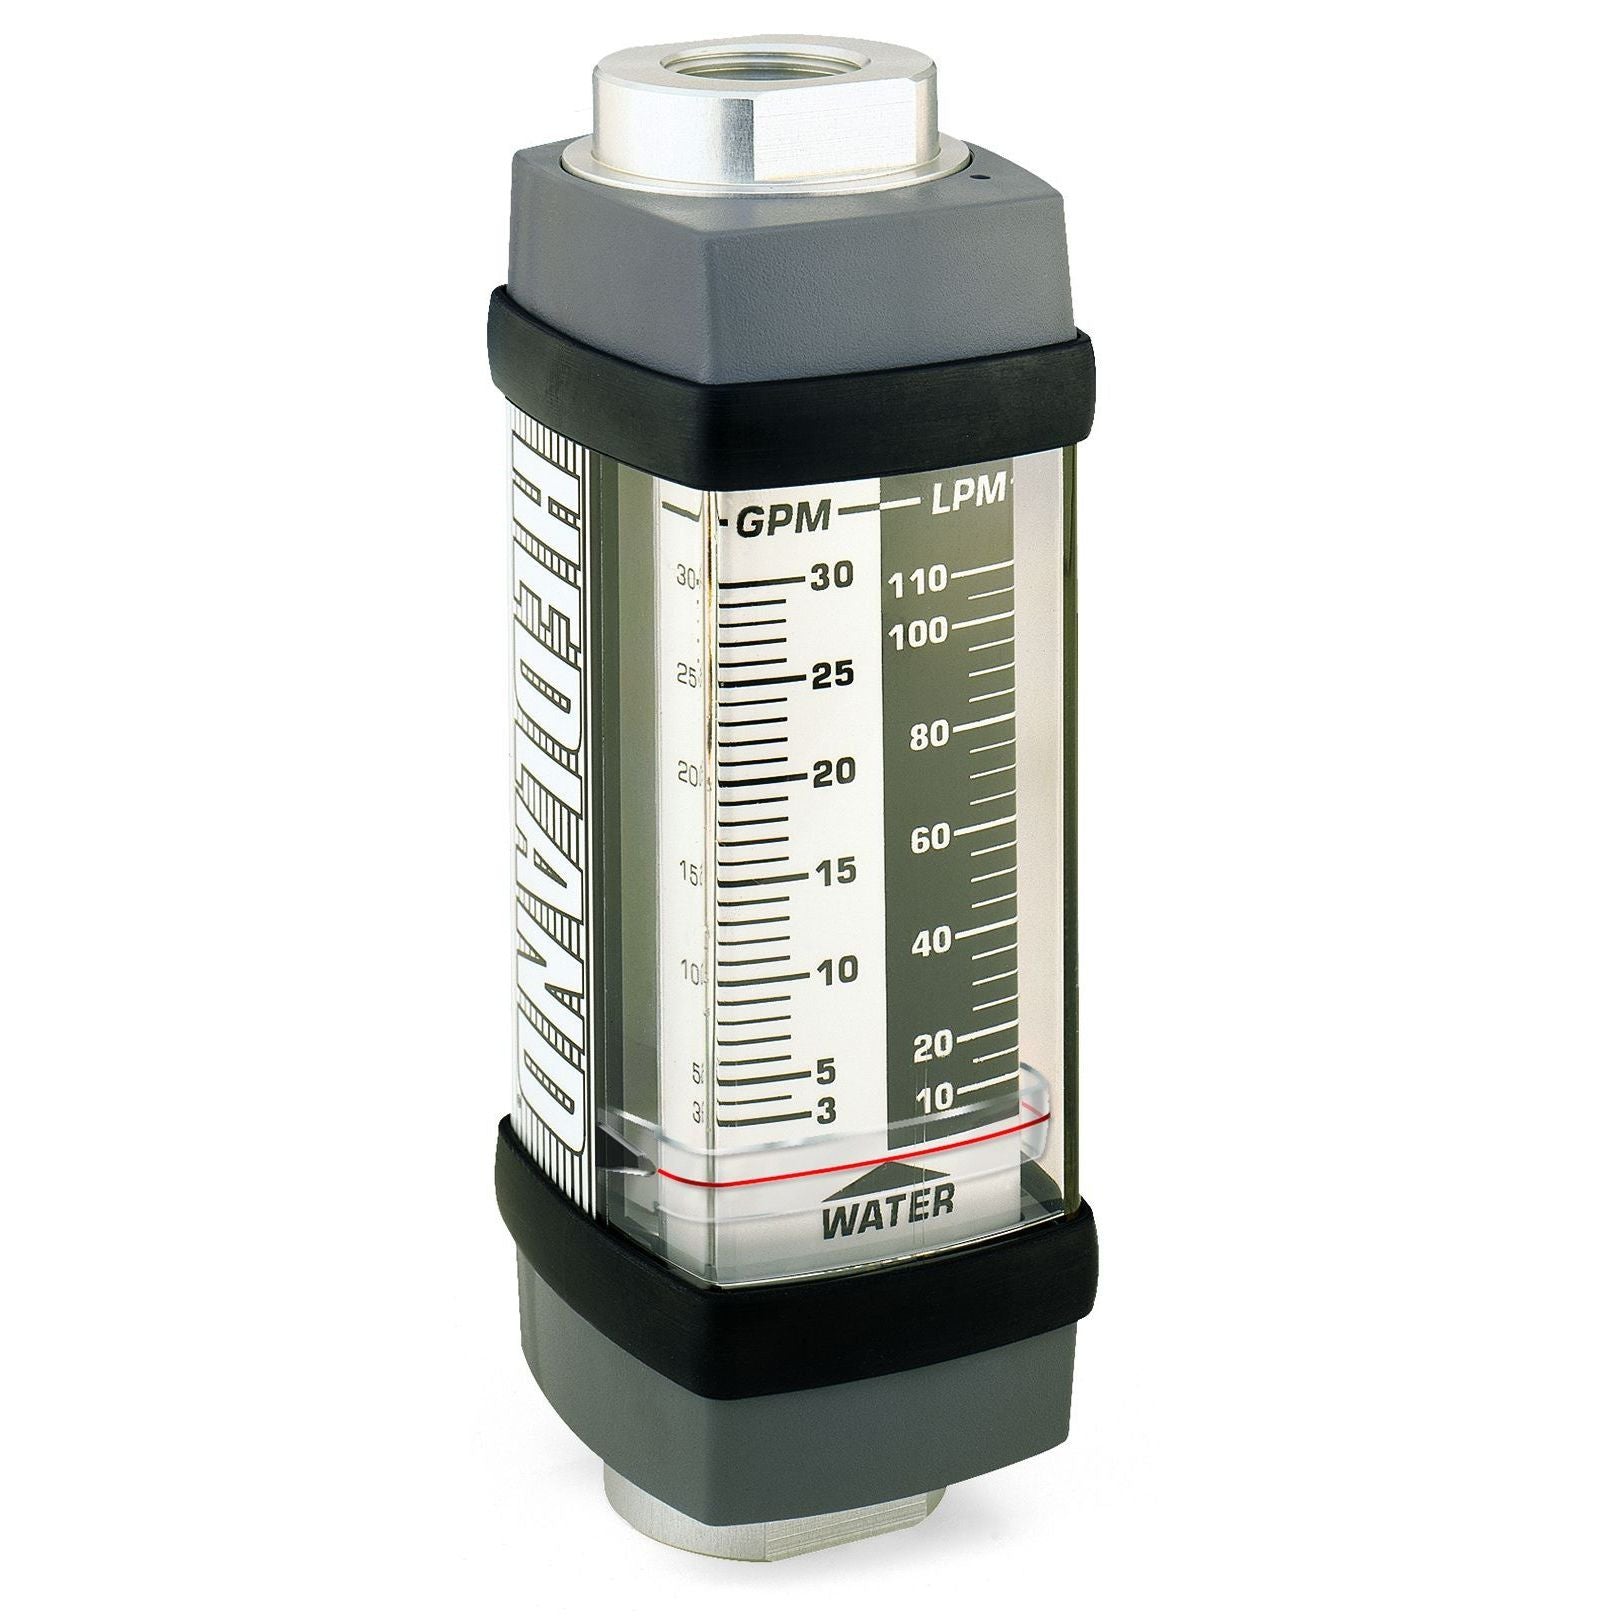 H841X-075 : Hedland 5000psi 316SS Flow Meter for Caustic or Corrosive Liquids, 1 NPT, 10 to 75 GPM